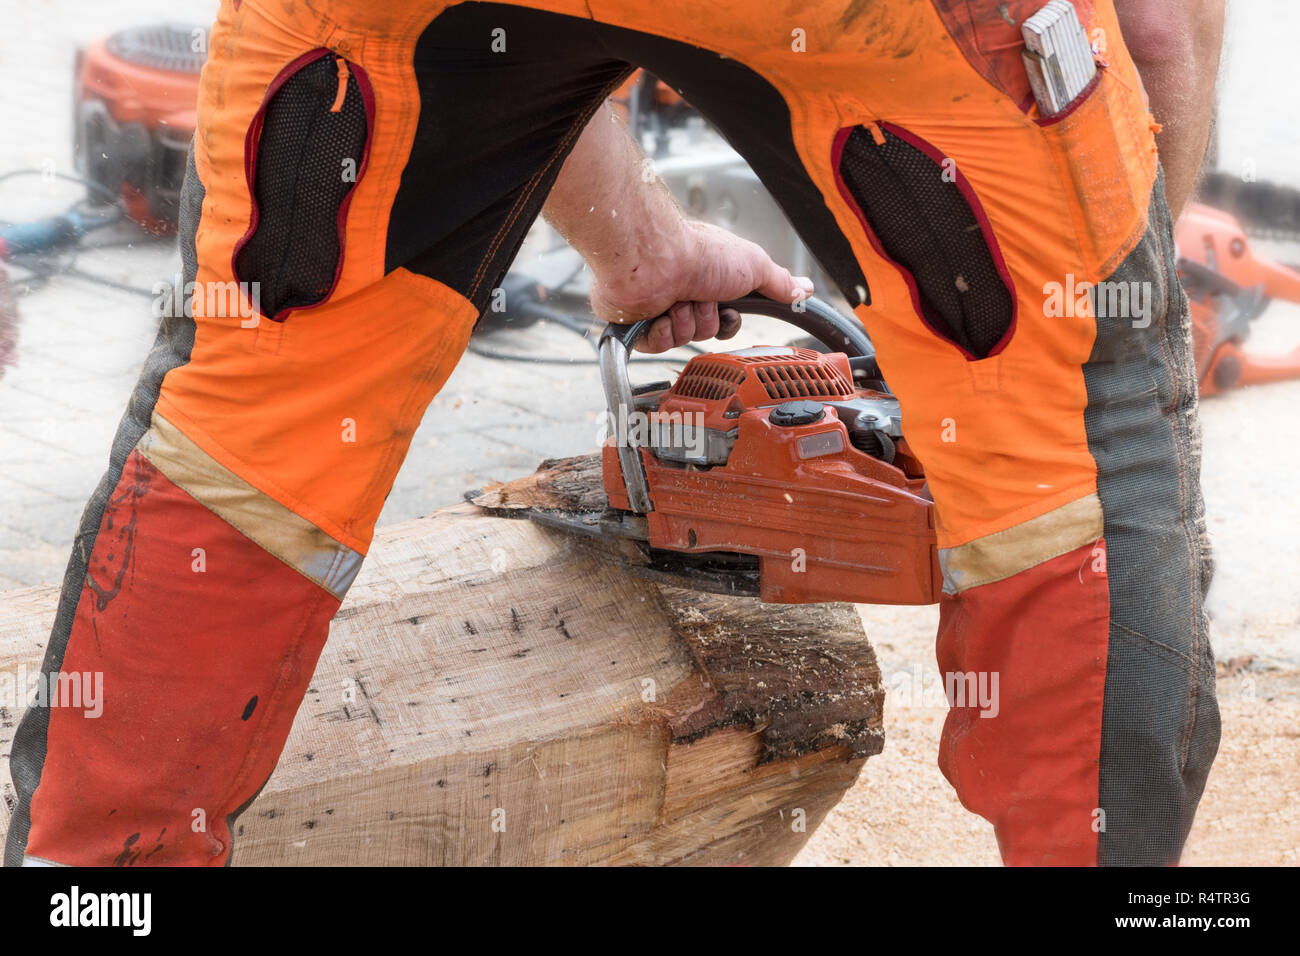 man in orange safety clothing from behind removing the bark from a tree trunk with a chainsaw, view through his legs, selected focus Stock Photo